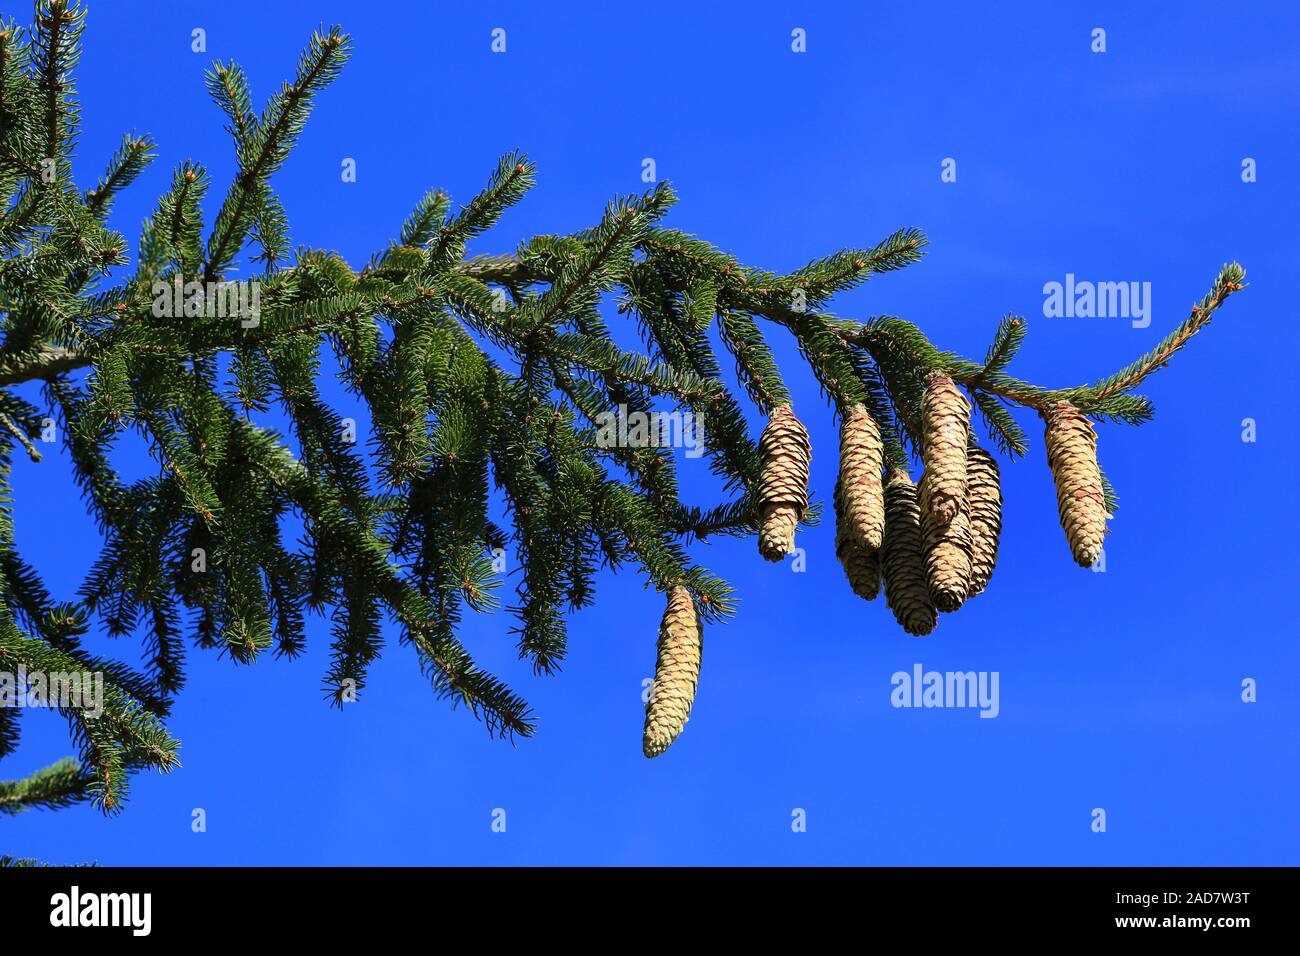 Norway spruce with cones, Common spruce, Picea abies Stock Photo